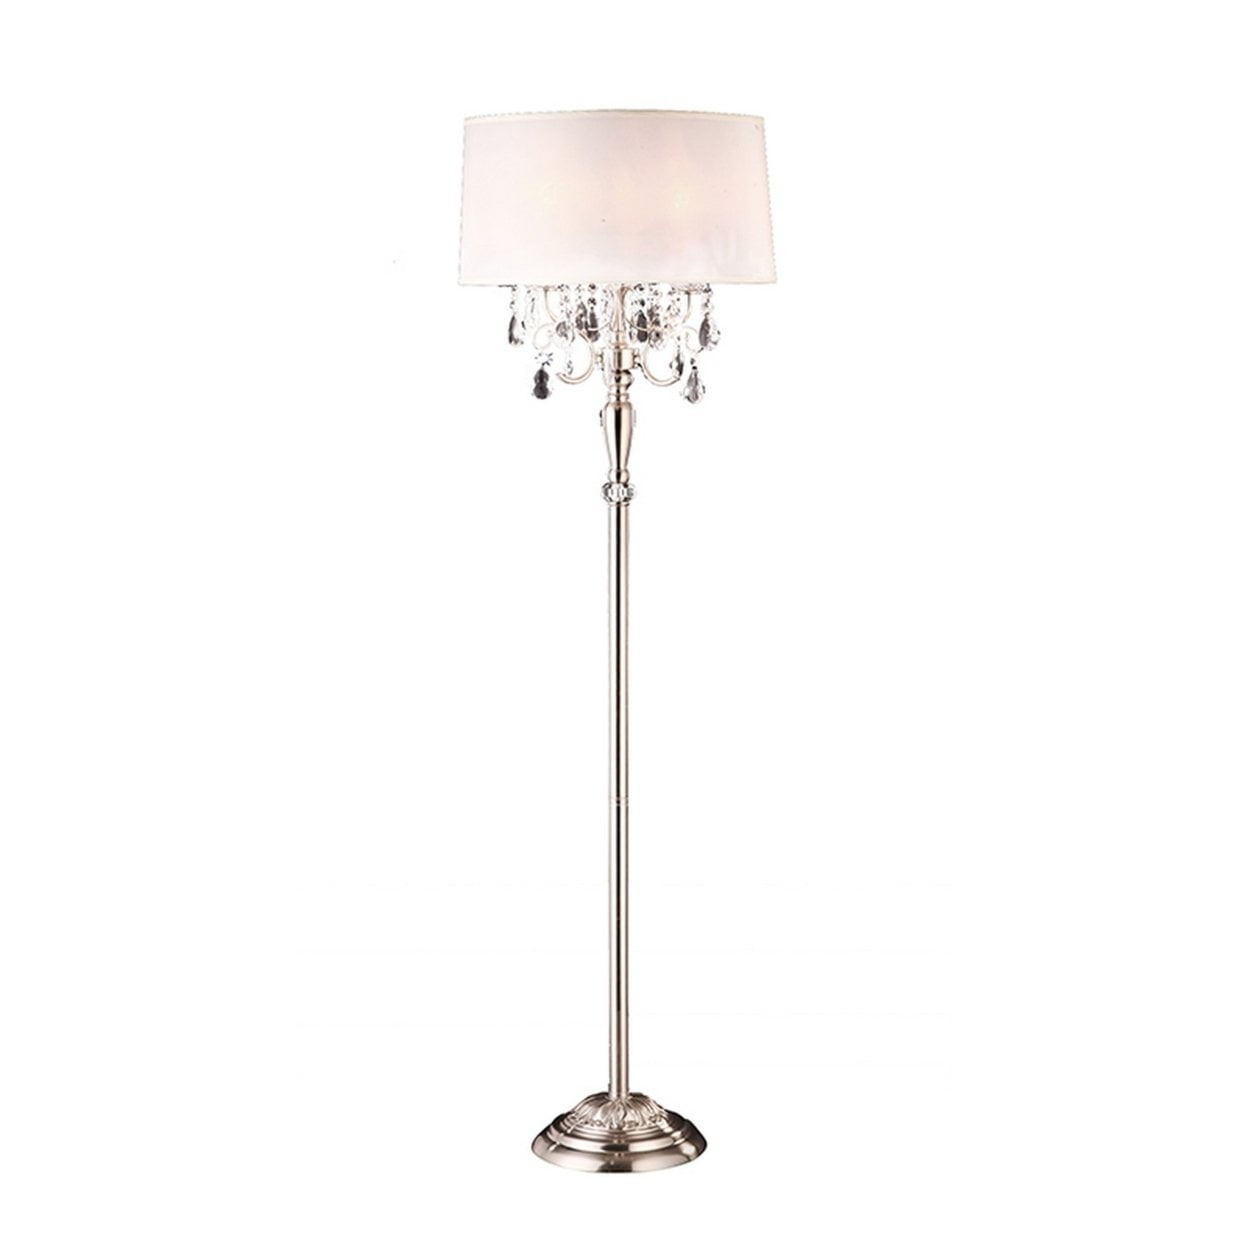 Picture of Benzara BM240909 Stalk Design Metal Floor Lamp with Hanging Crystal Accent, Silver